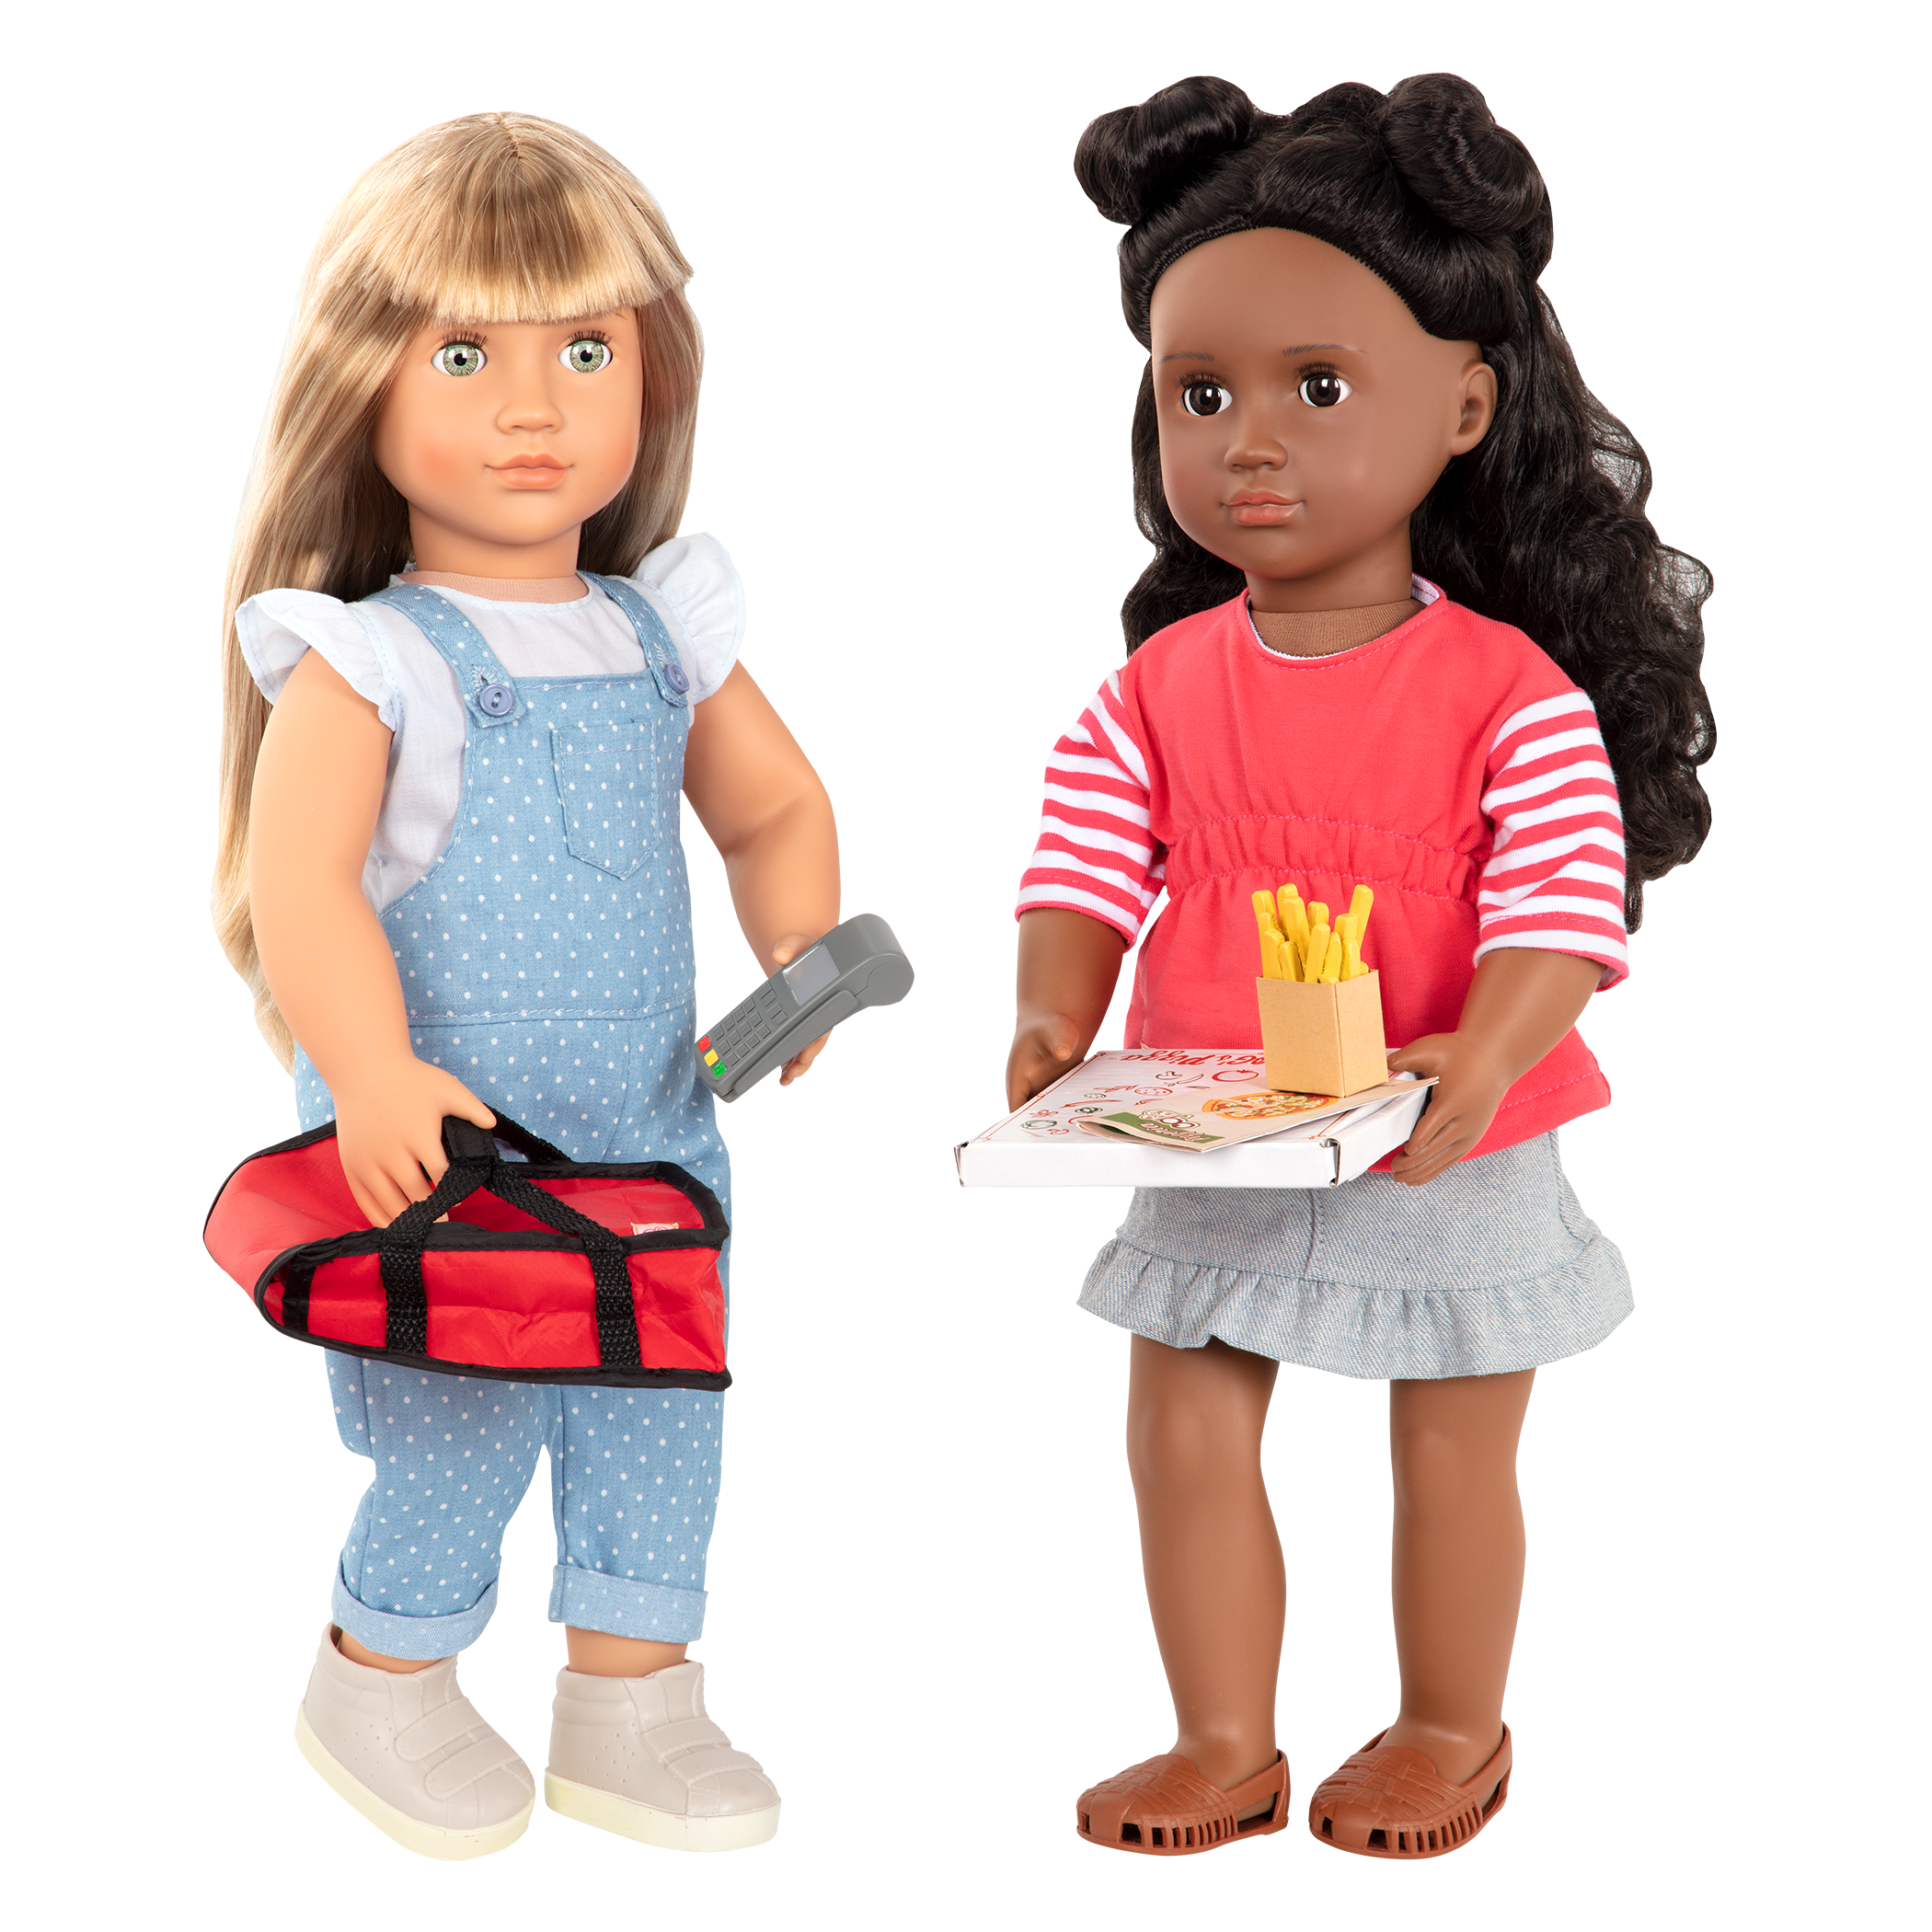 18-inch dolls with pizza delivery playset